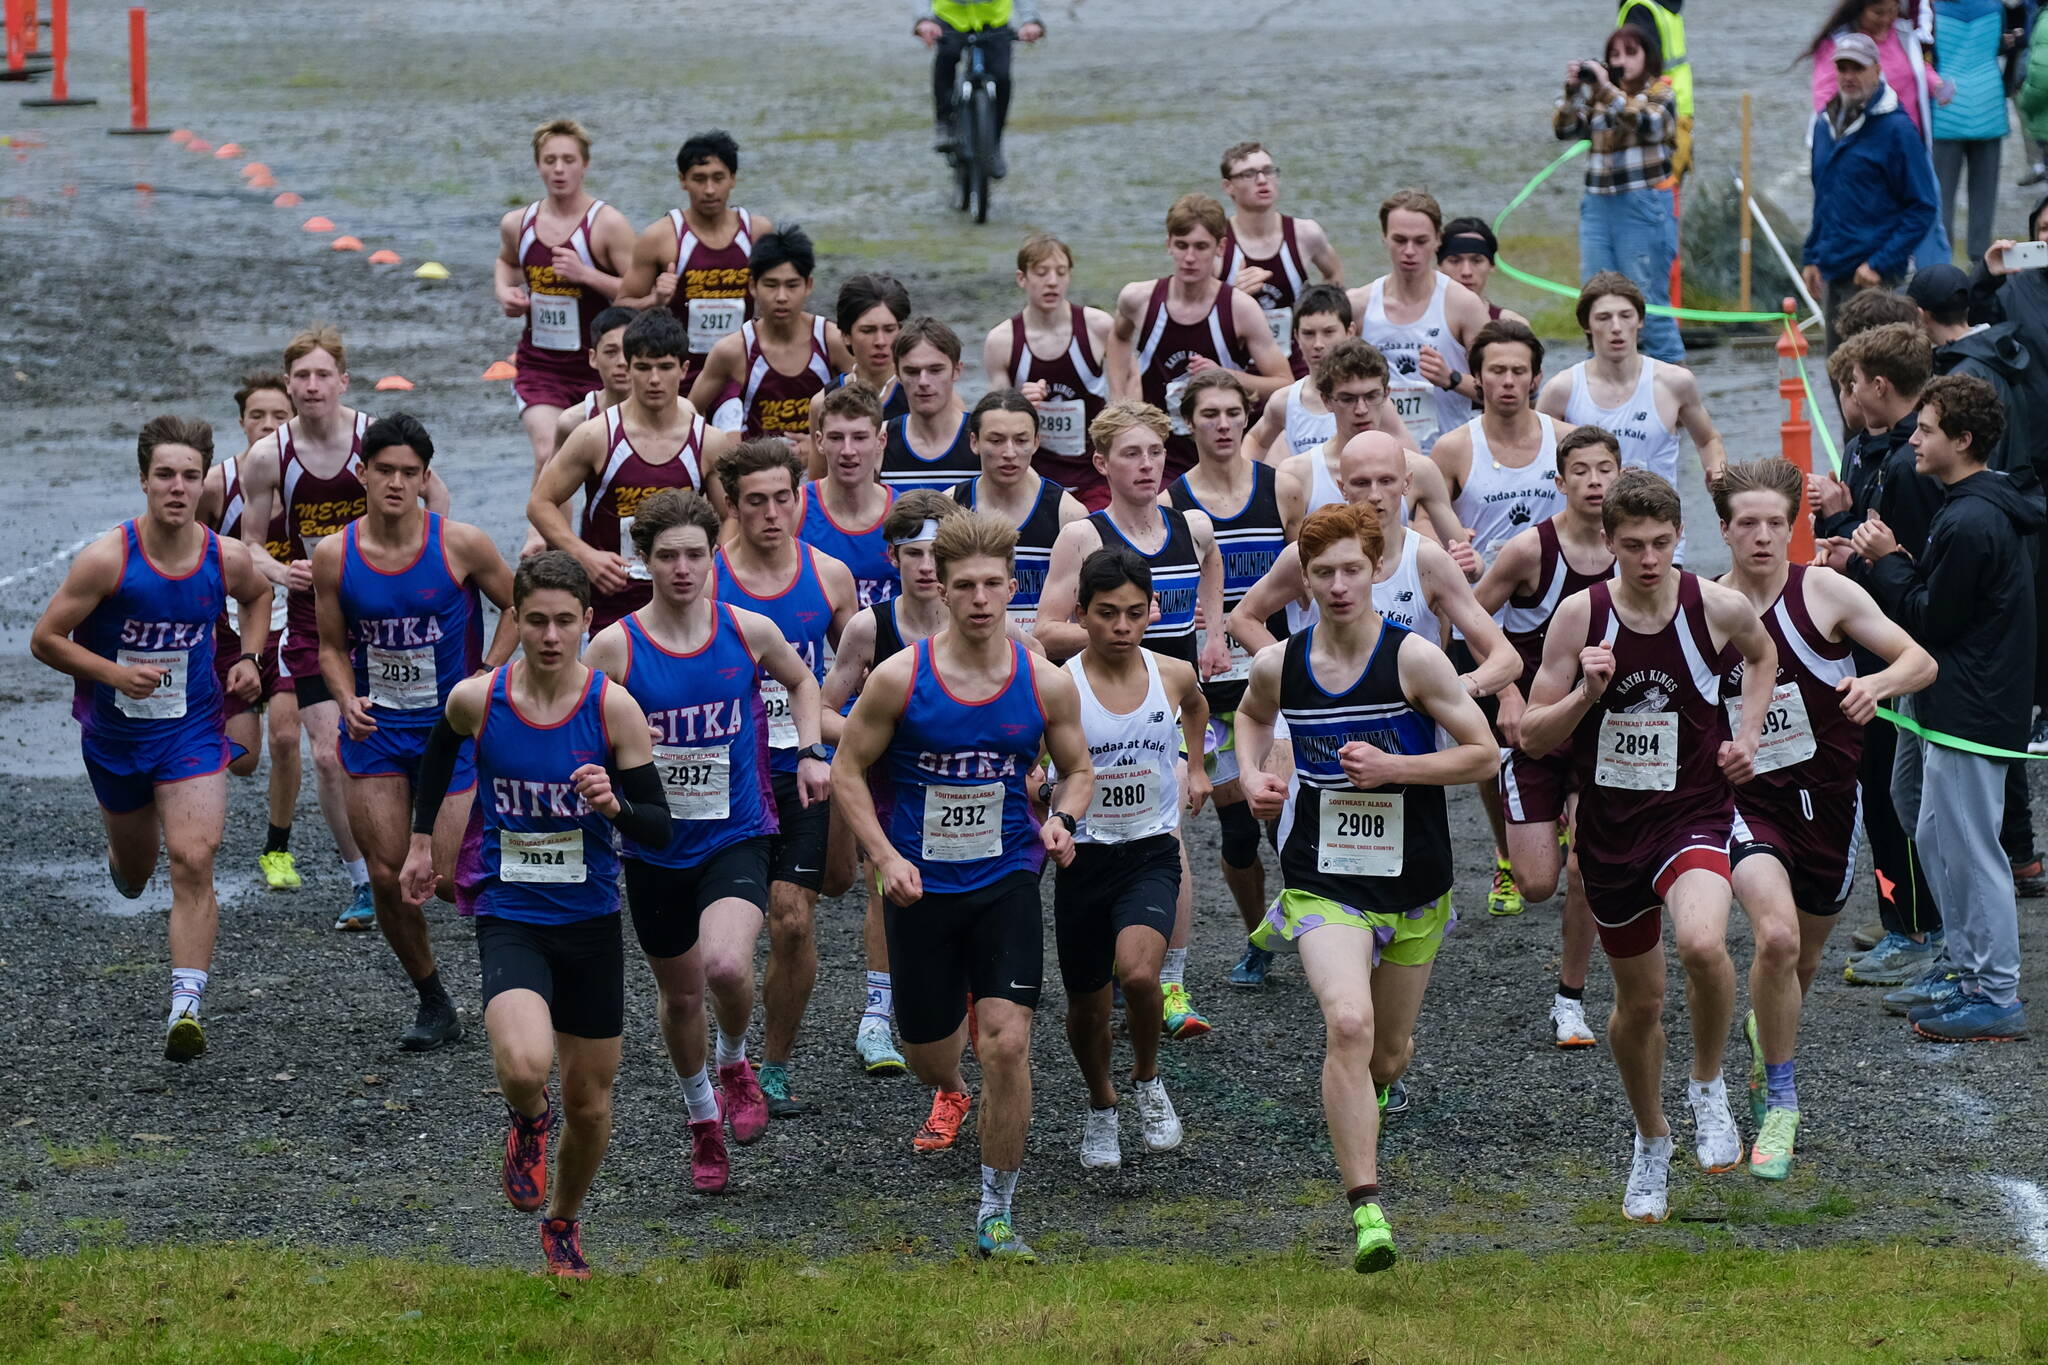 Runners start the combined DI/DII Region V Boys Cross Country Championship race on Saturday at Treadwell Mine Trails. (Klas Stolpe / For the Juneau Empire)